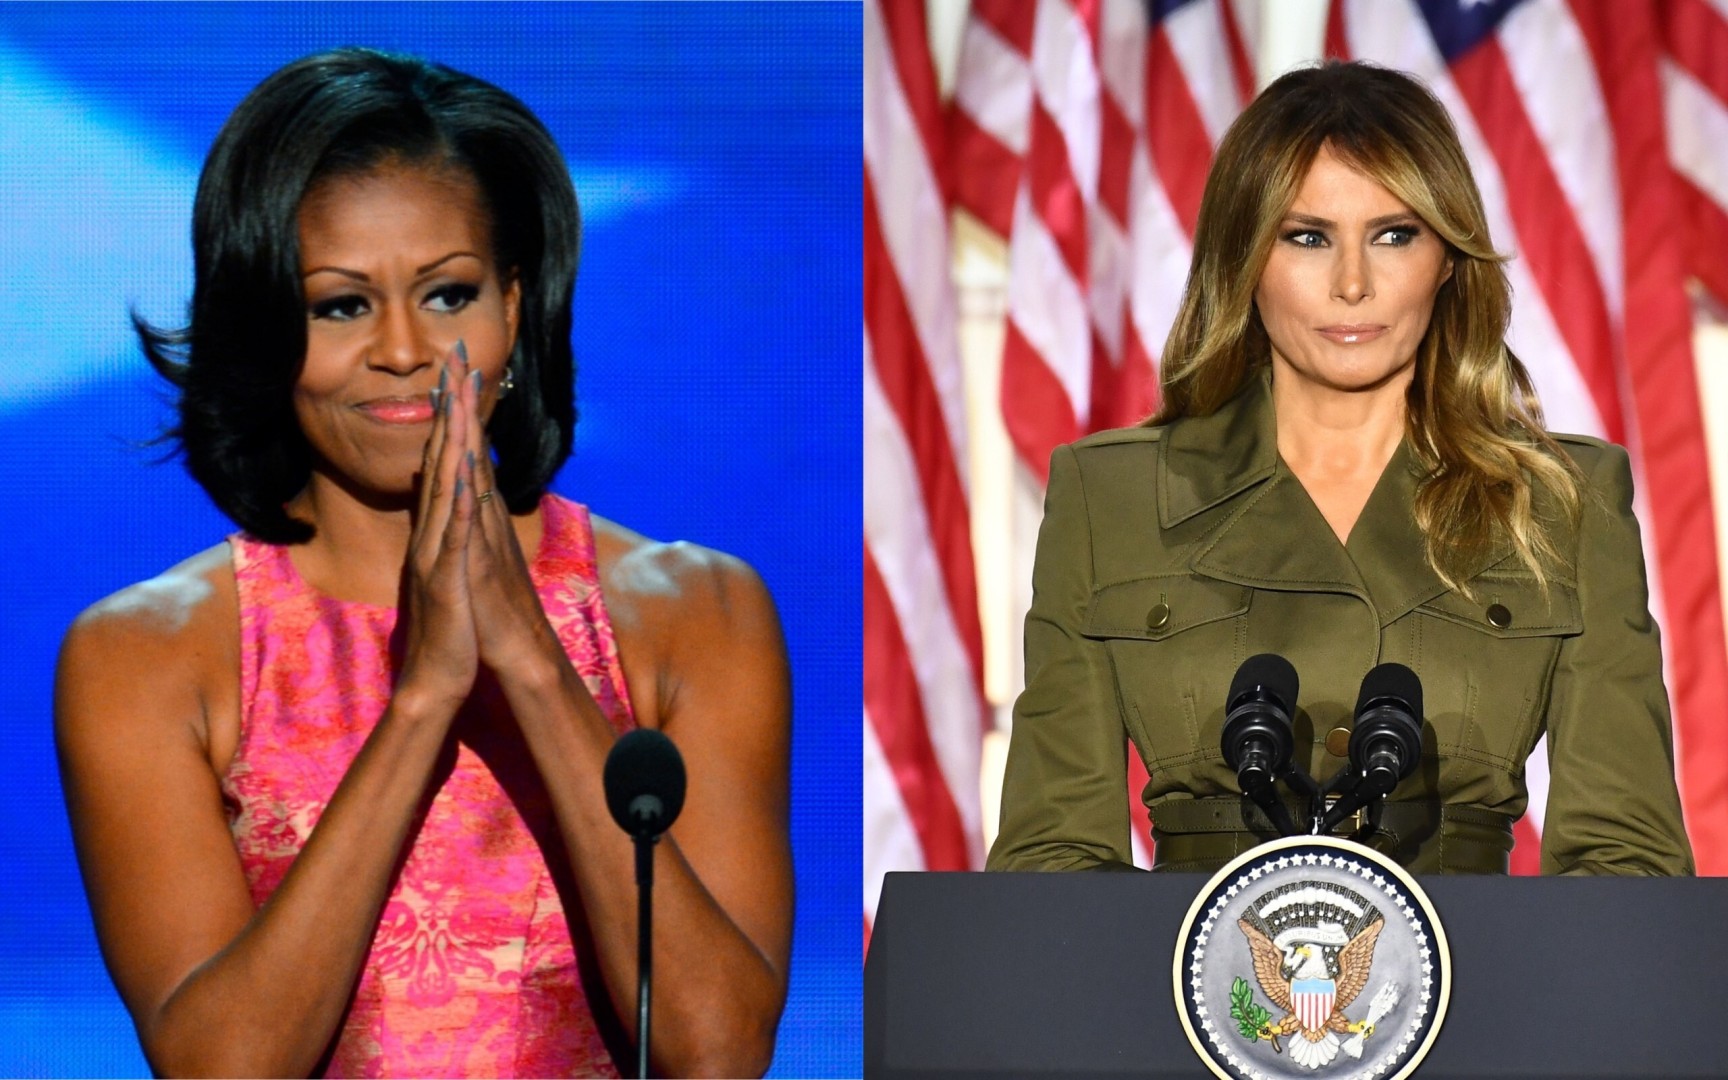 Melania Trump S Alexander Mcqueen Military Uniform Vs Michelle Obama S Rose Dress By Black Designer Tracy Reese How 2 First Ladies Used Fashion To Send Very Different Messages South China Morning Post